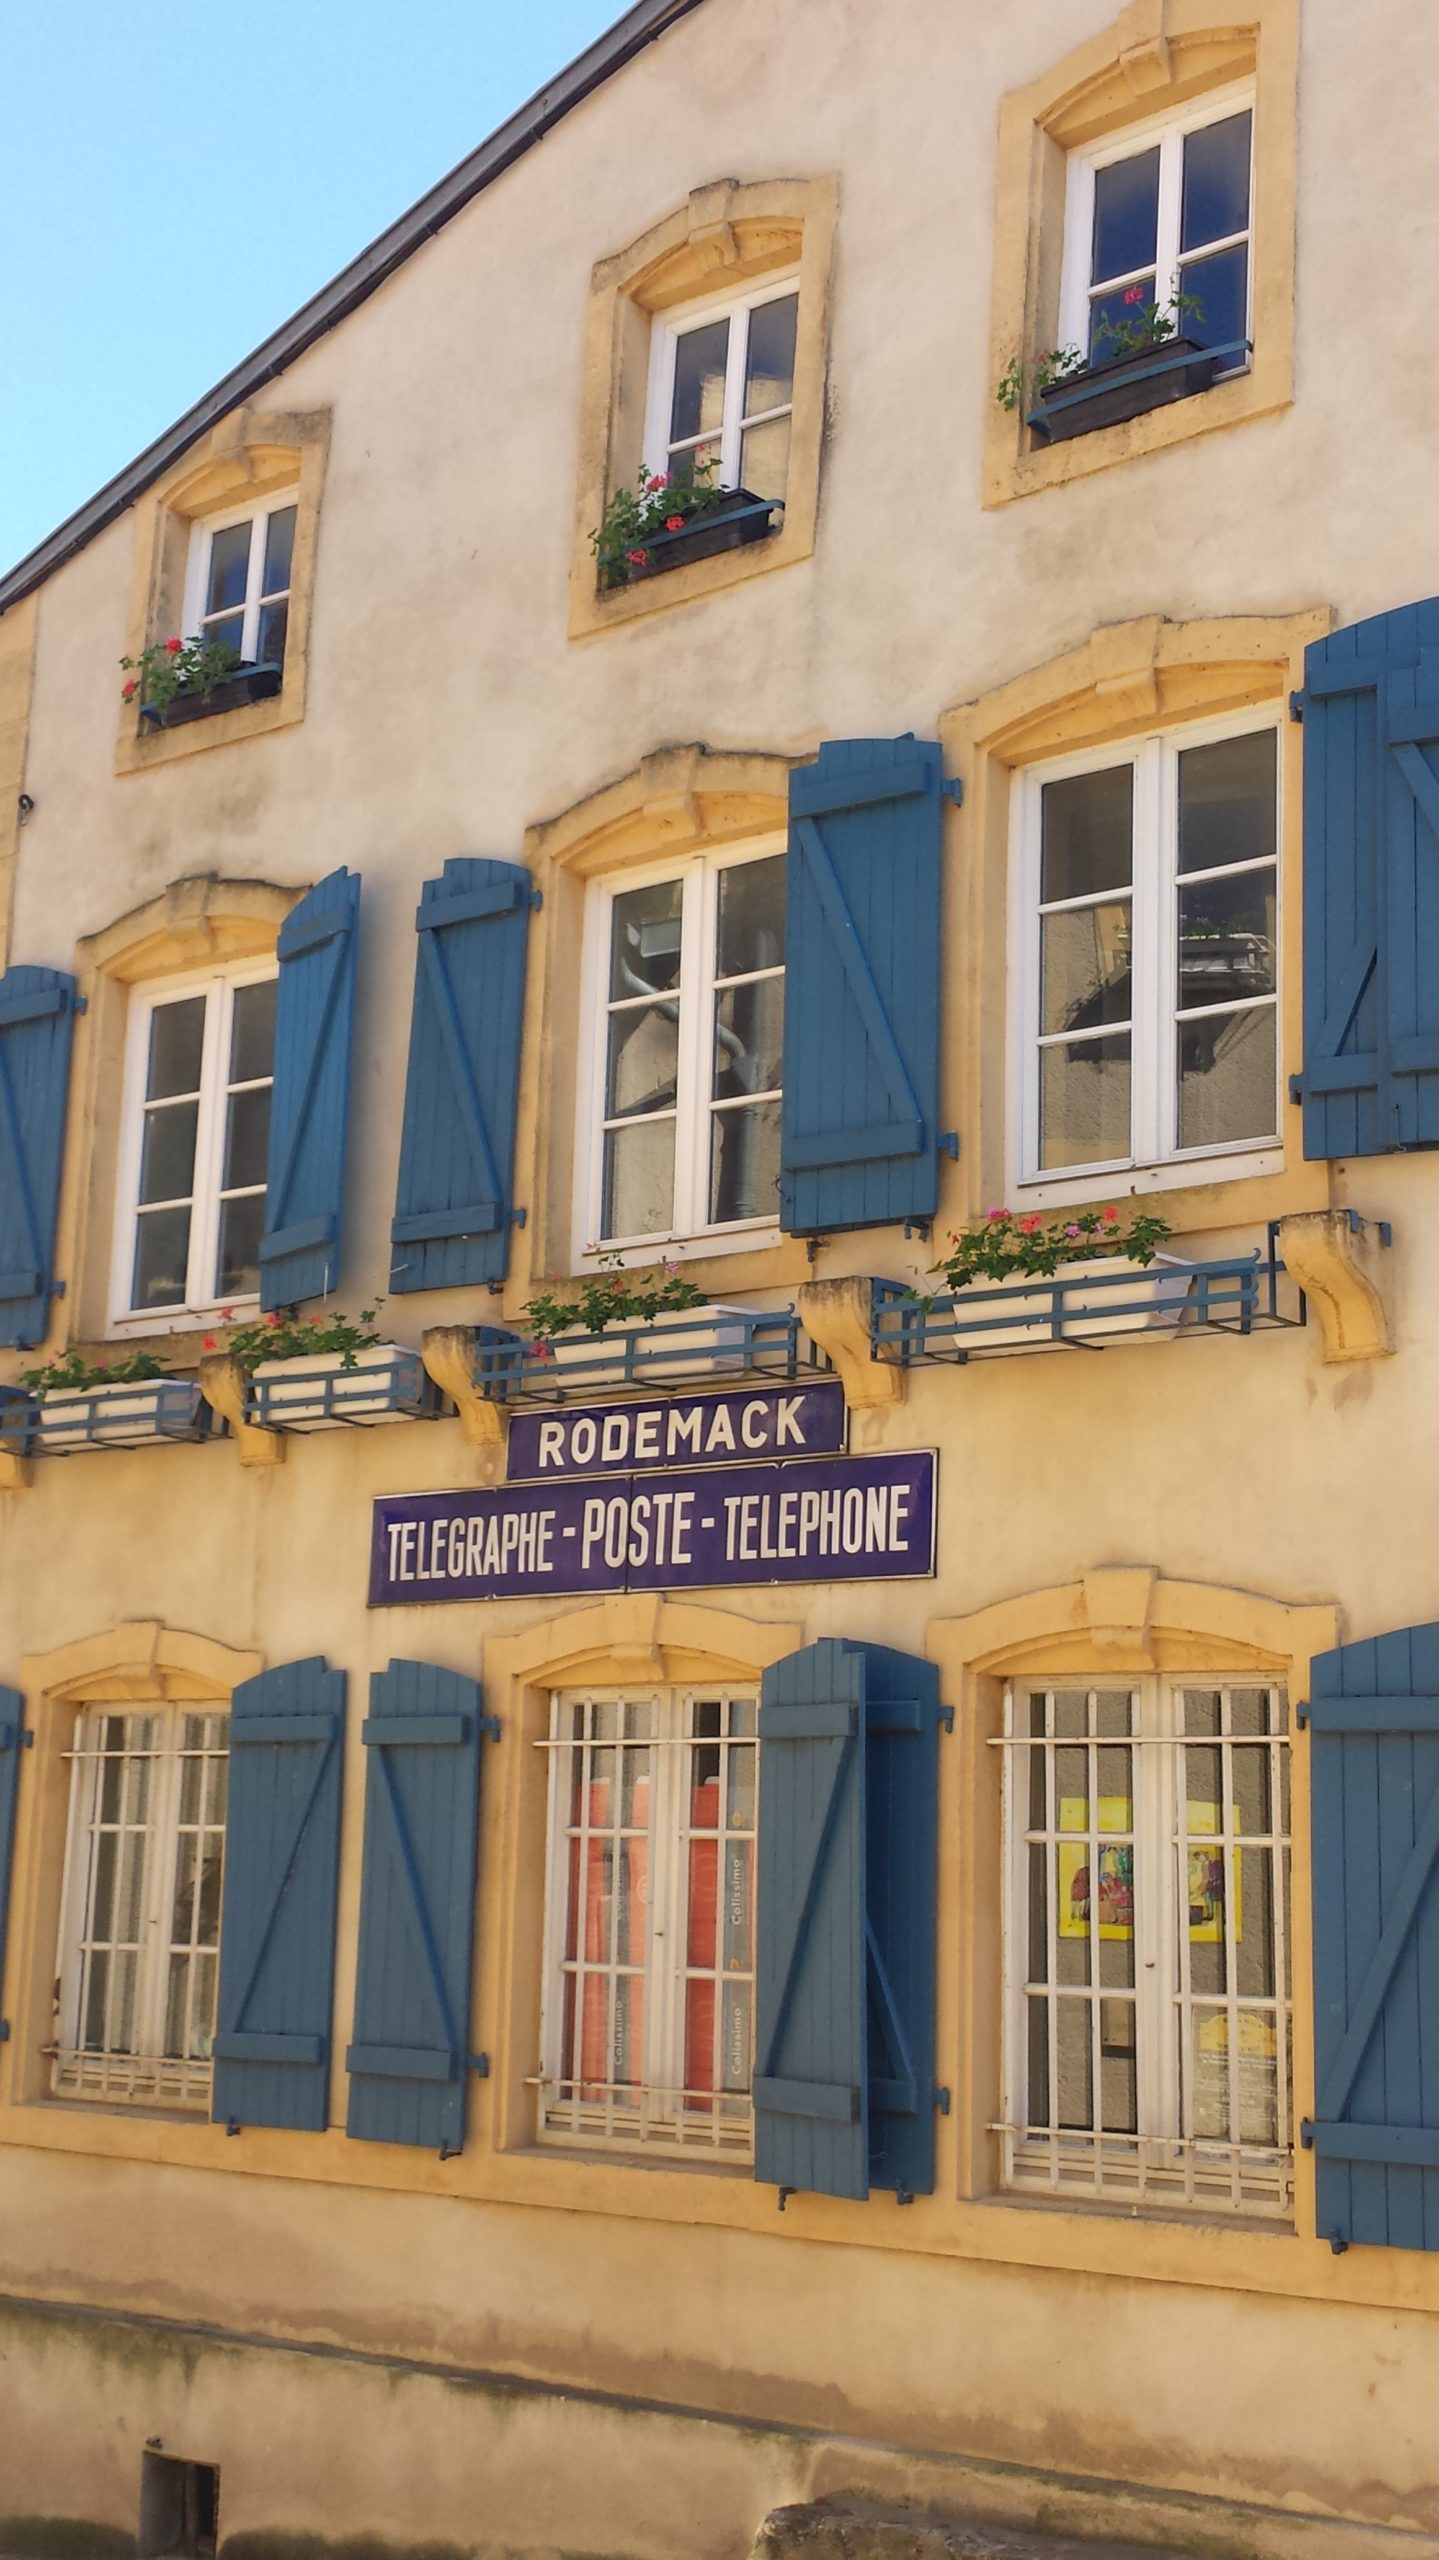 Rodemack: One of the most picturesque French villages